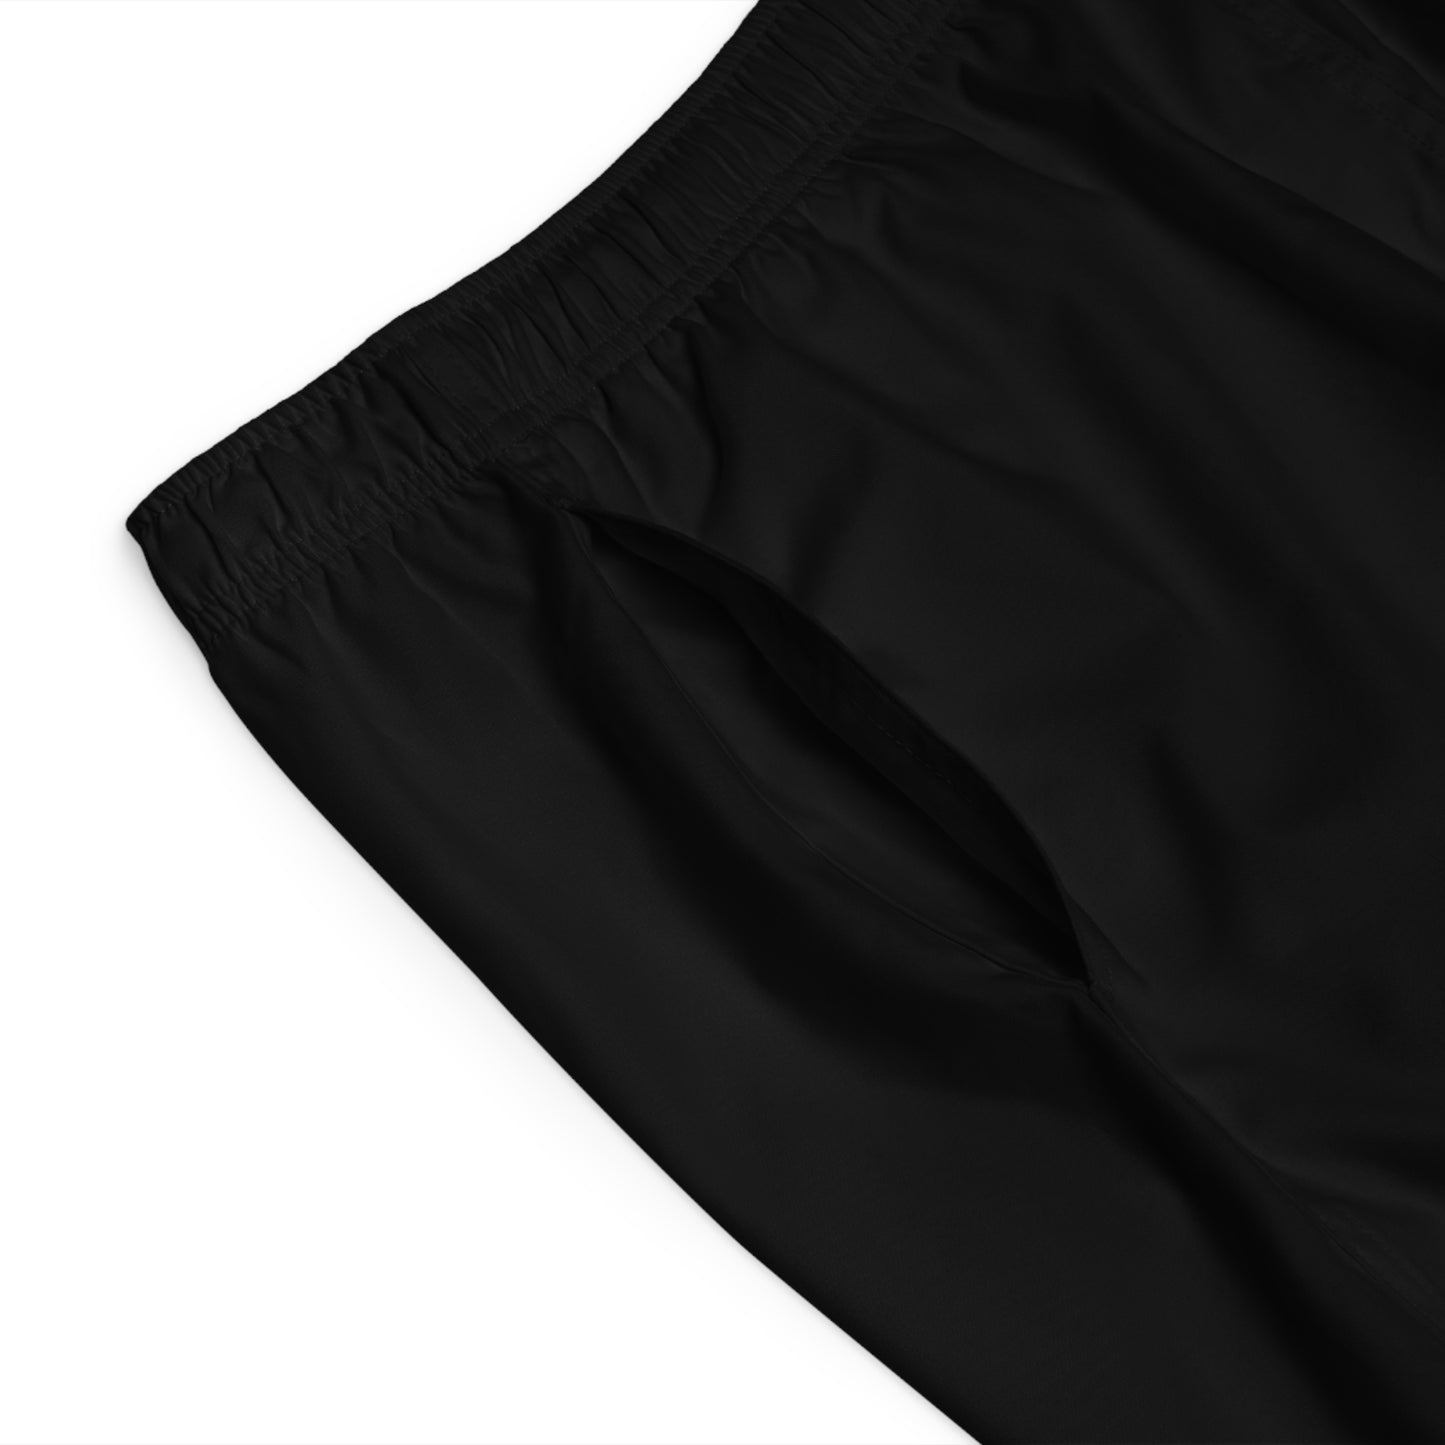 Refs Need Love Too Men's Board Shorts With Pockets | Available in Black only | Great gift for Refs | For Sports Officials | Great shorts for swimmers | Make a statement at the beach